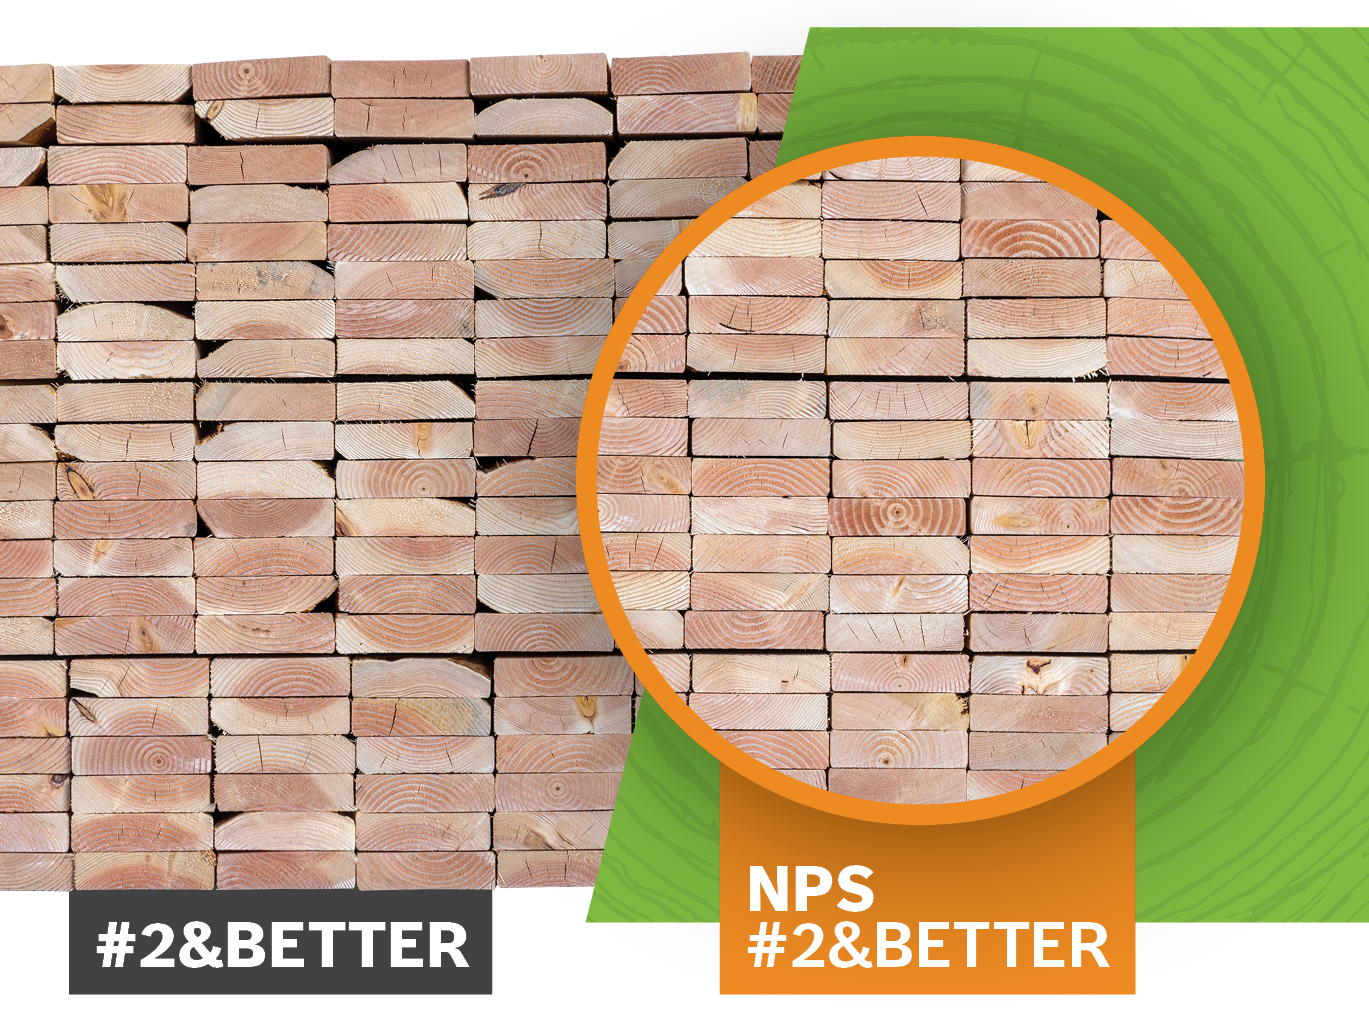 A stack of "2 and better" lumber on the left and a stack of "NPS" lumber on the right